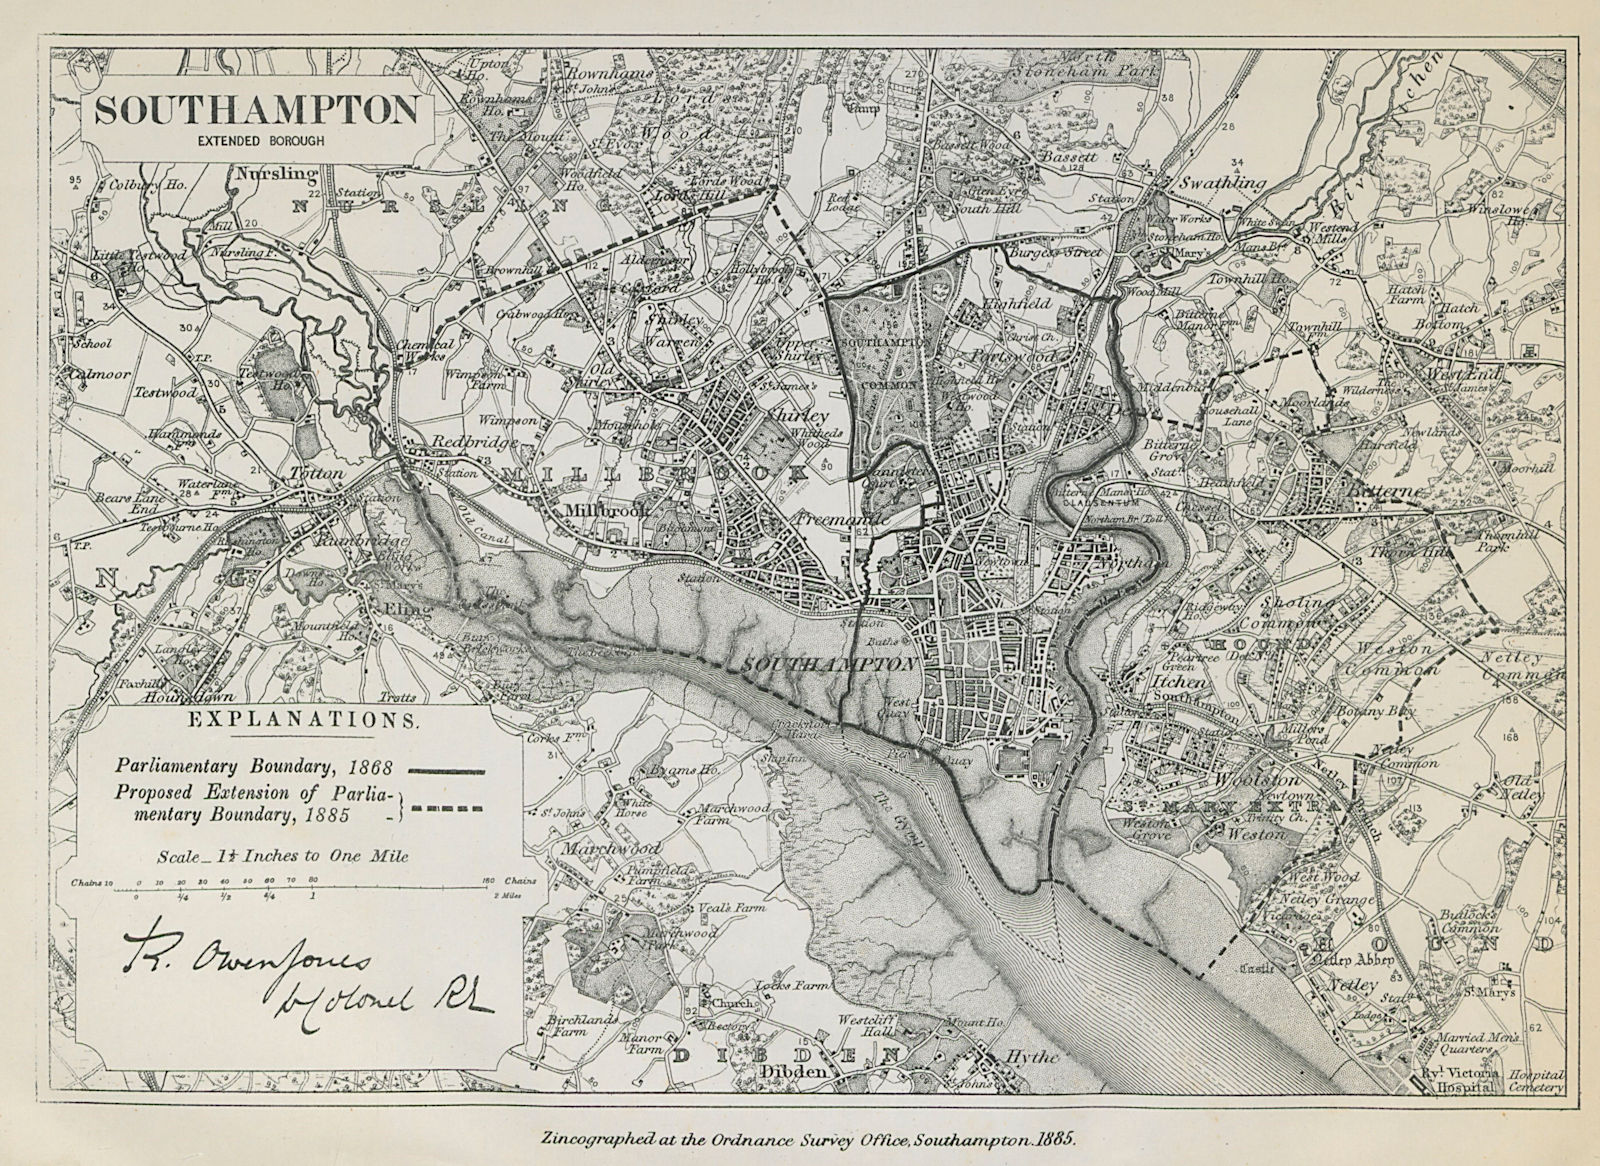 Associate Product Southampton Parliamentary Borough. Millbrook. BOUNDARY COMMISSION 1885 old map